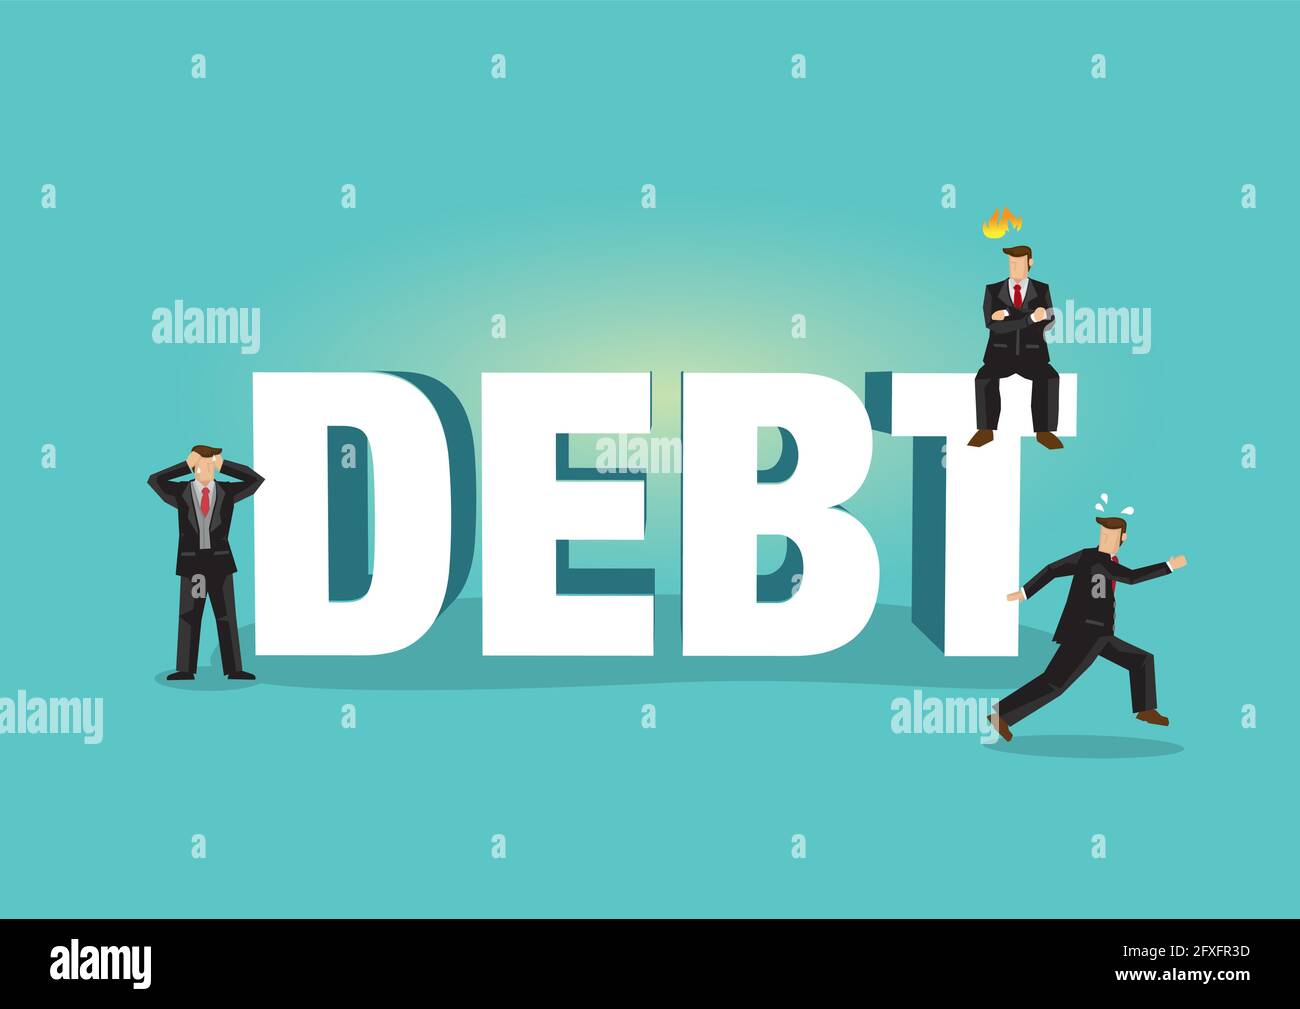 Typeface of Debt decorated with office businessman. Business concept of business debt, business activities and problems. Vector illustration. Stock Vector